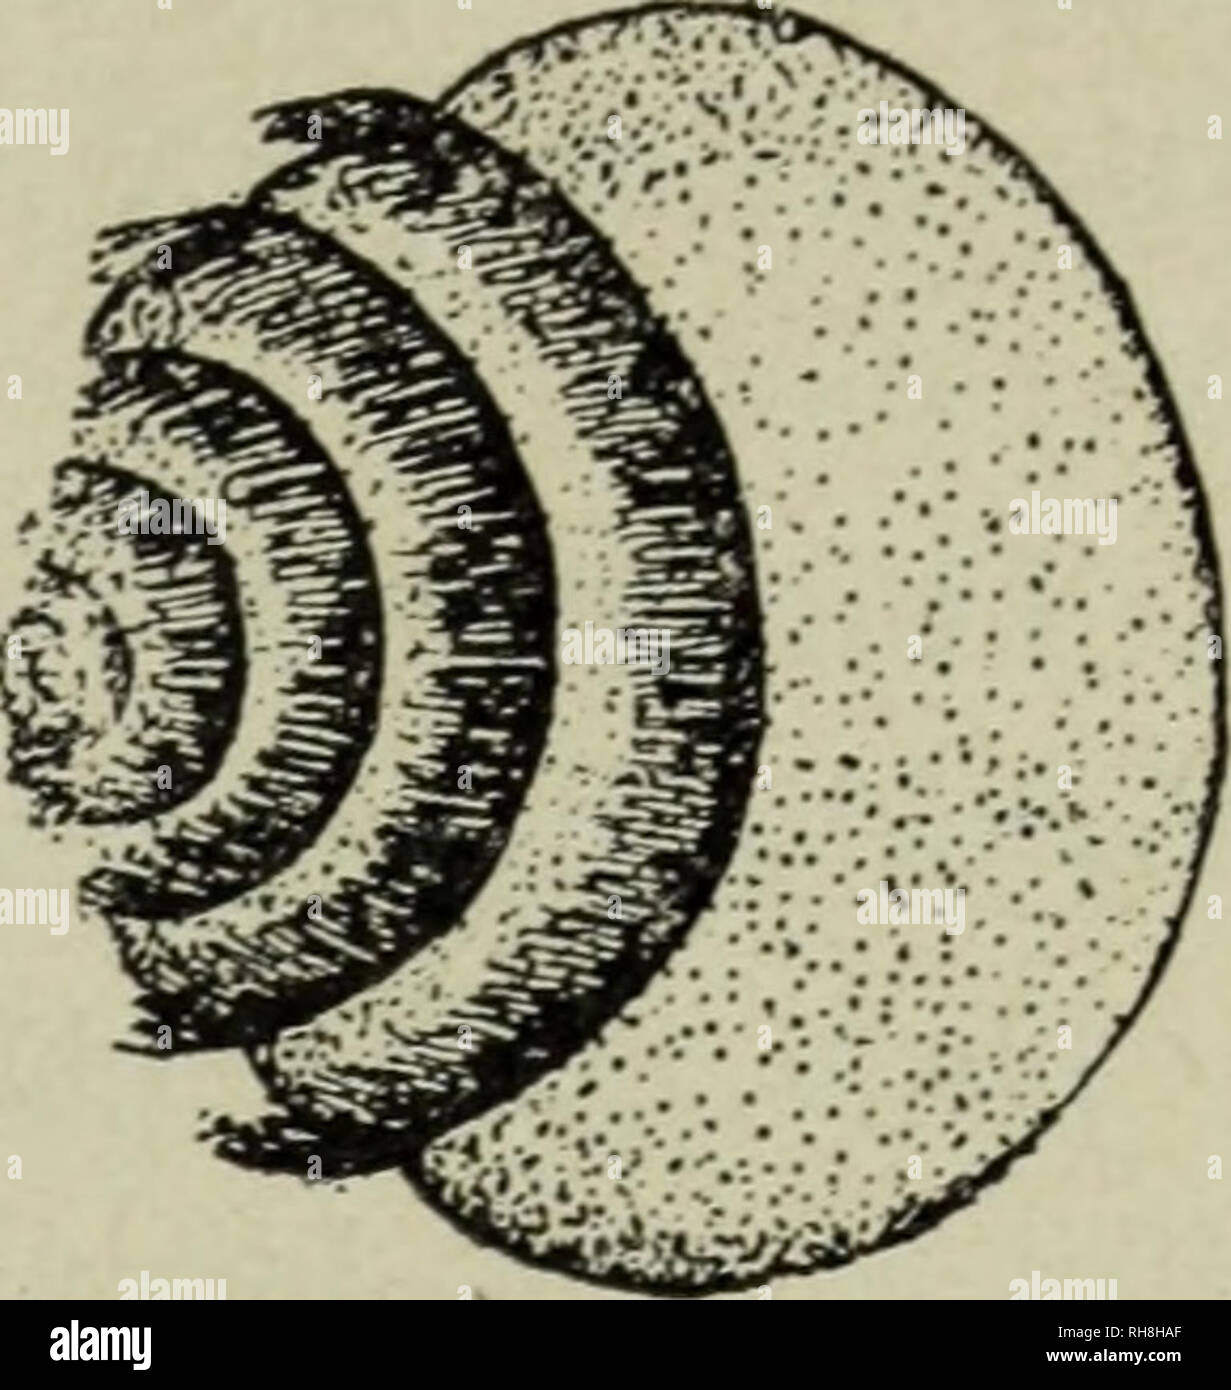 . Botany for high schools. Botany. Fig. 372. Sperms of zamia in pollen tube; pg, pollen grain; an, sperms. (After Webber.) Fig. 373. Sperm of zamia, show- ing spiral row of cilia. (After Webber.) Europe, America, and other countries, as an ornamental tree. It is the sole survivor of a group of plants which were very abundant in geological times. The leaves are triangular, radi- ately veined, and resemble in form the pinnules of the maiden hair fern (Adianfum). The large spore cases form a fleshy fruit, about the size of a plum, with a soft exocarp and a stony endocarp, the meat within being th Stock Photo